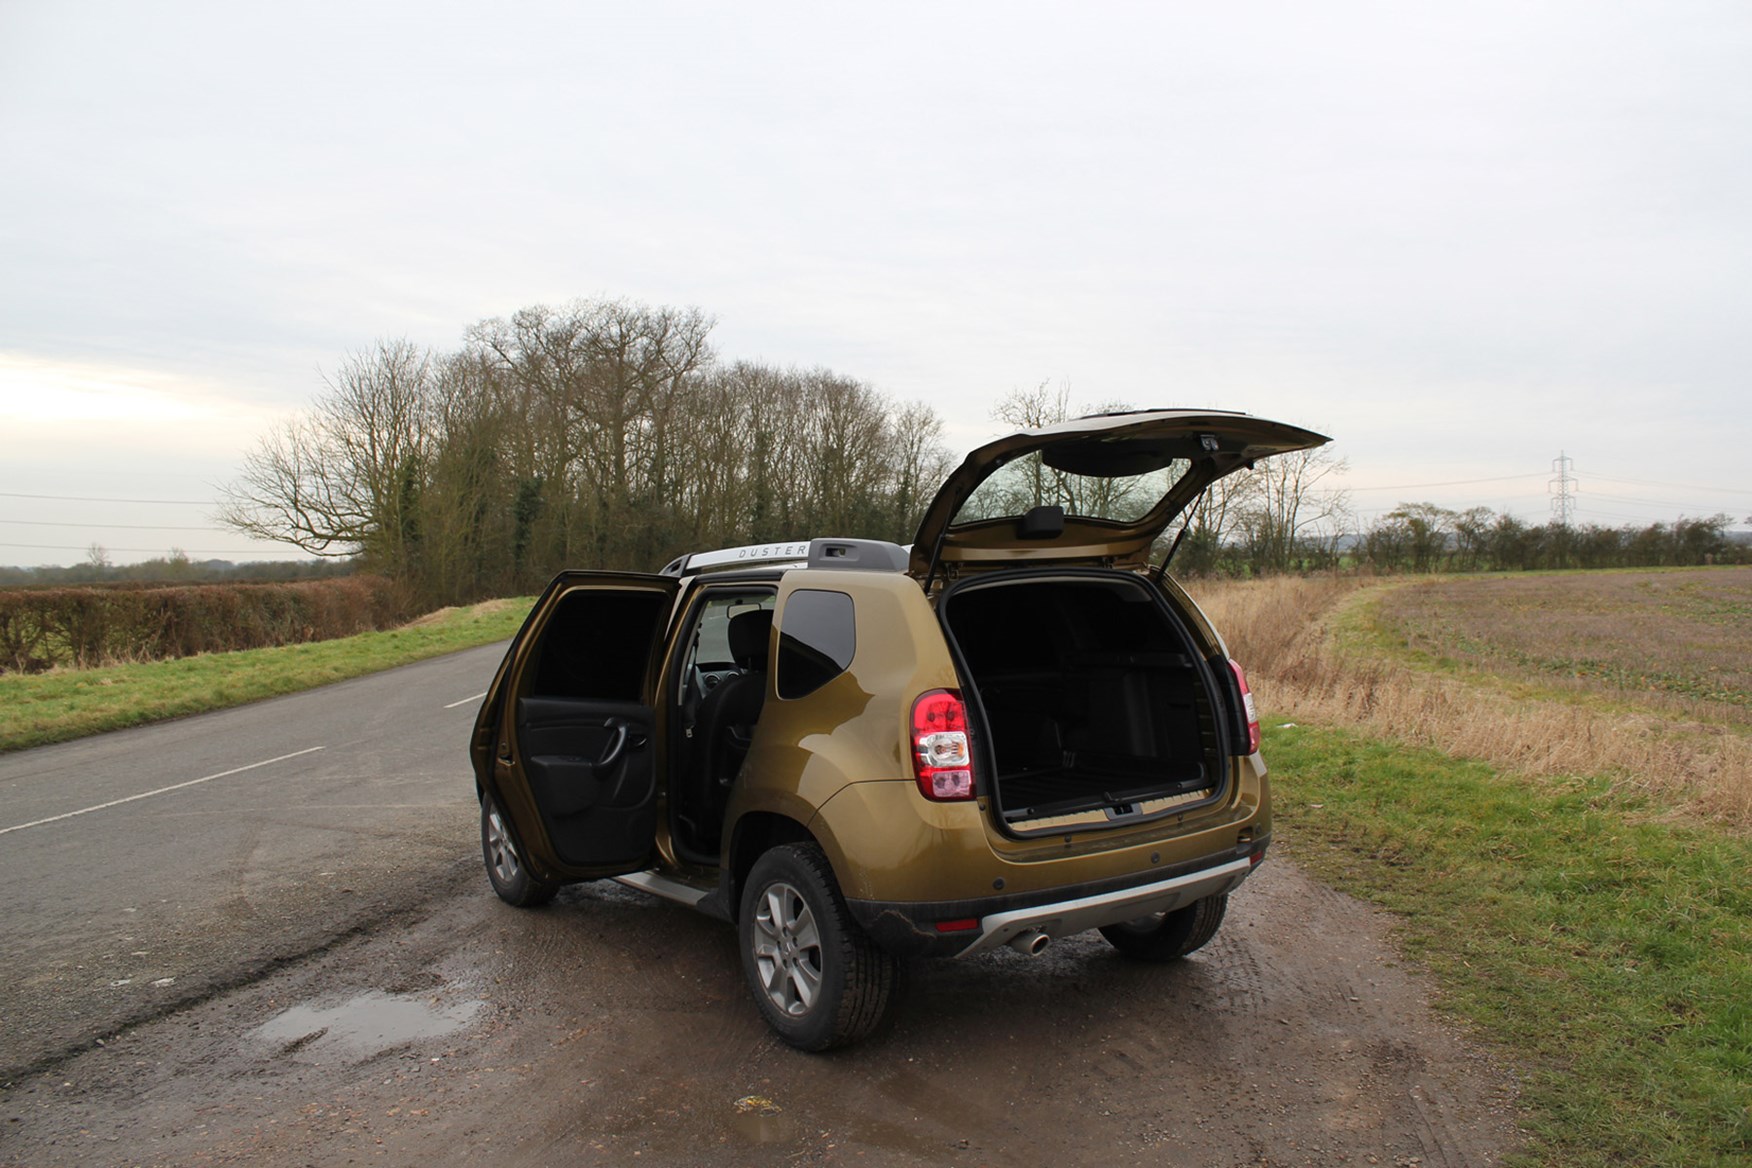 Dacia Duster full review on Parkers Vans - load area